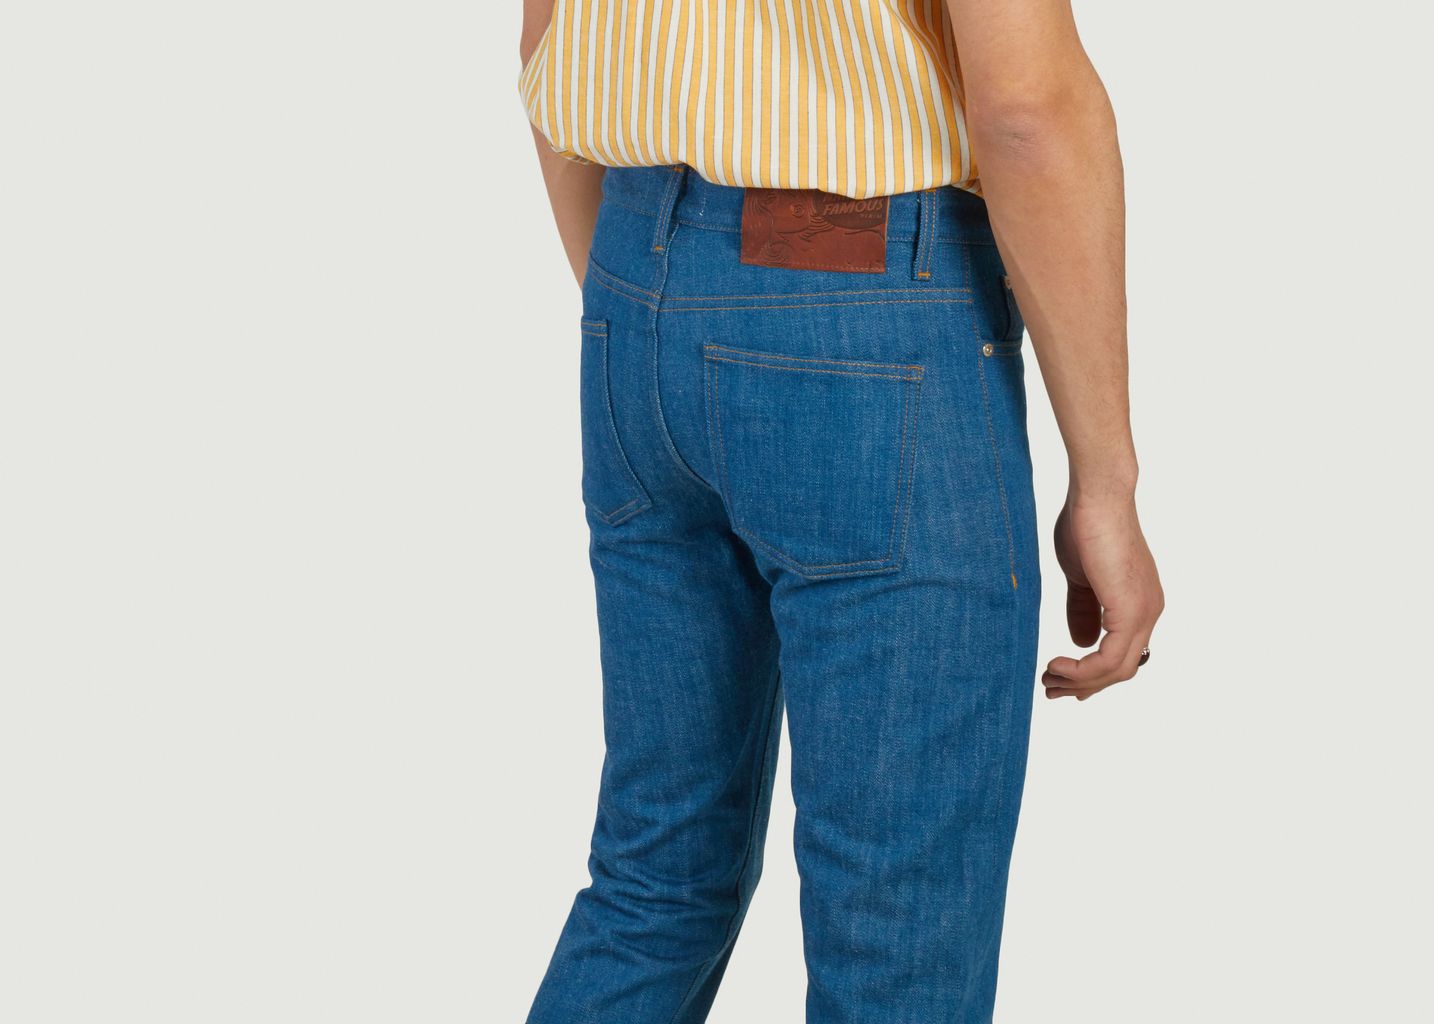 Jeans Super Guy Oceans Edge Selvedge - Naked and Famous